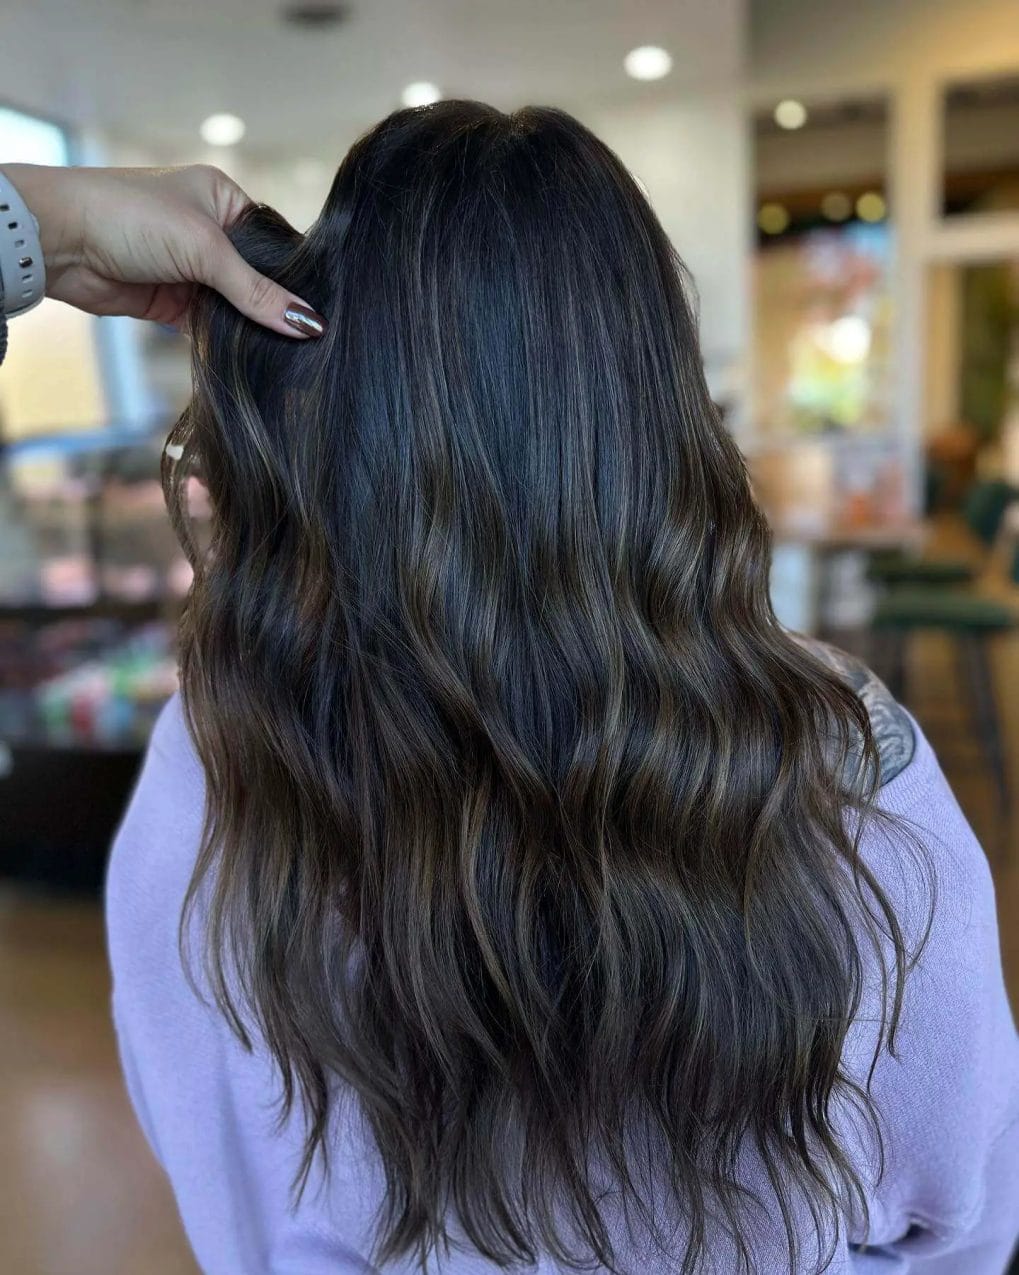 Long, luxurious waves with espresso to ash brown balayage, capturing winter's serene beauty.